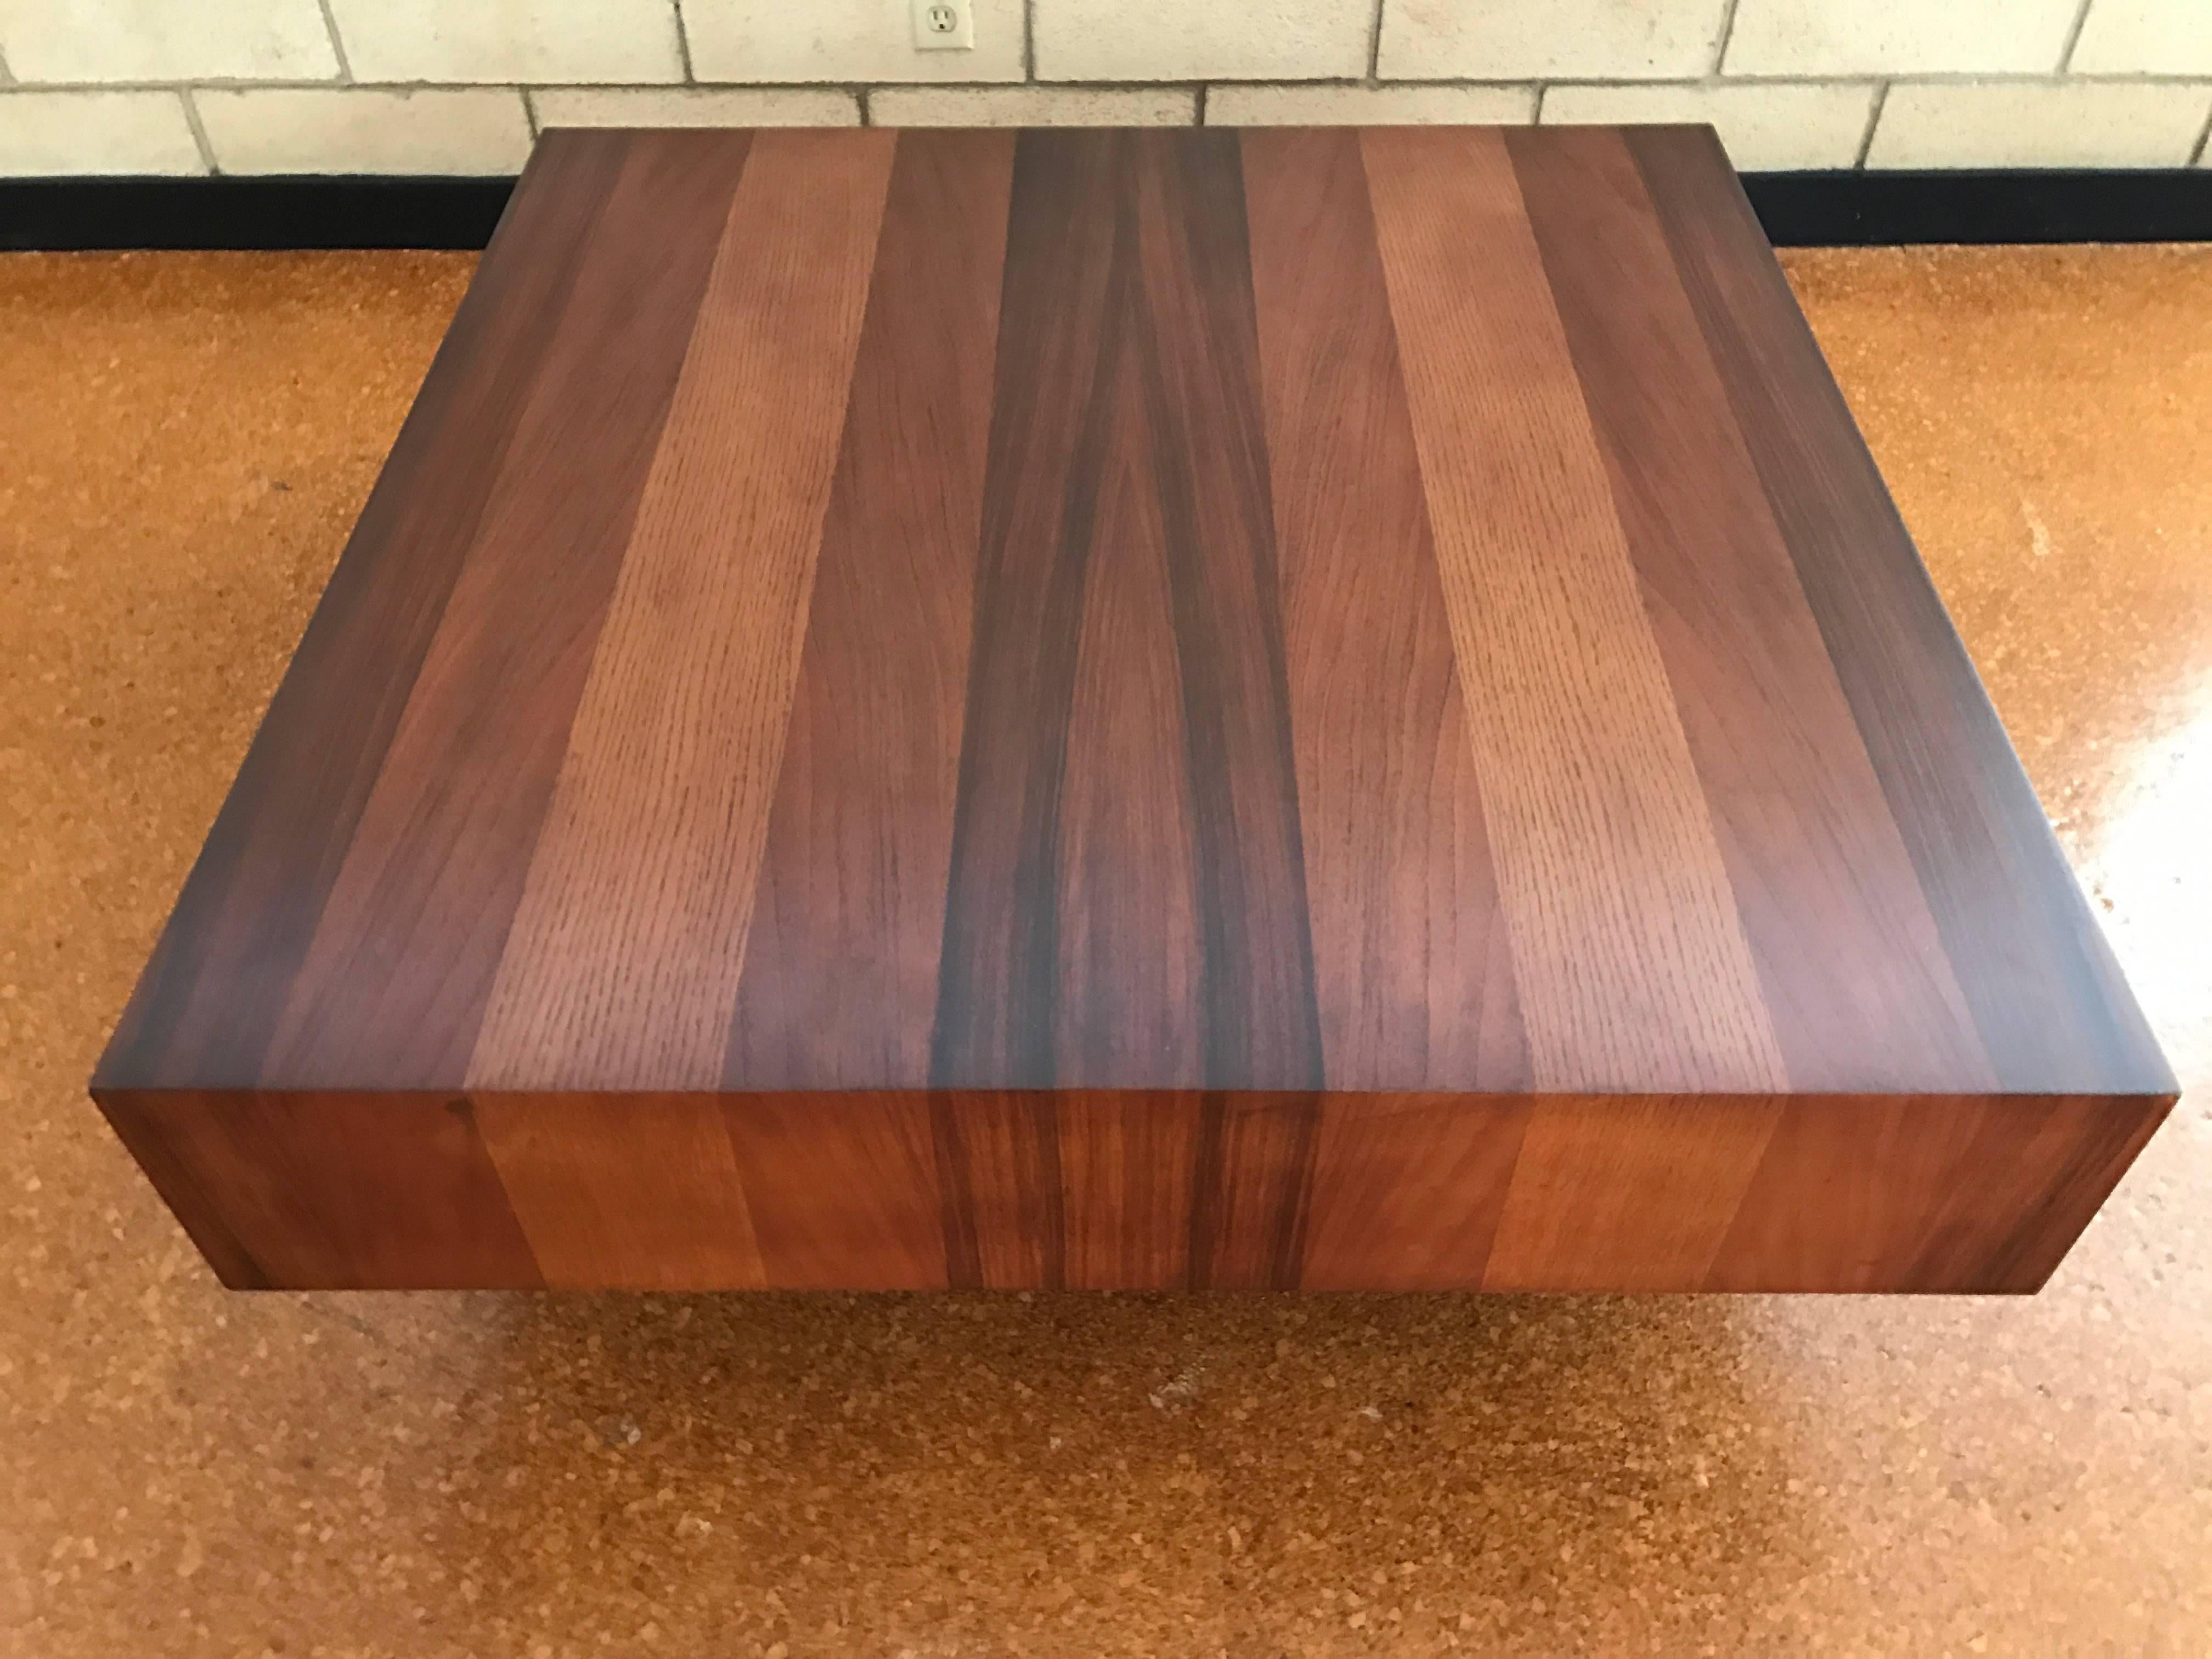 Rosewood, walnut and oak mixed woods coffee table on a black plinth base by Dyrlund, Denmark. Measures: 41" square x 18" tall. Refinsihed.